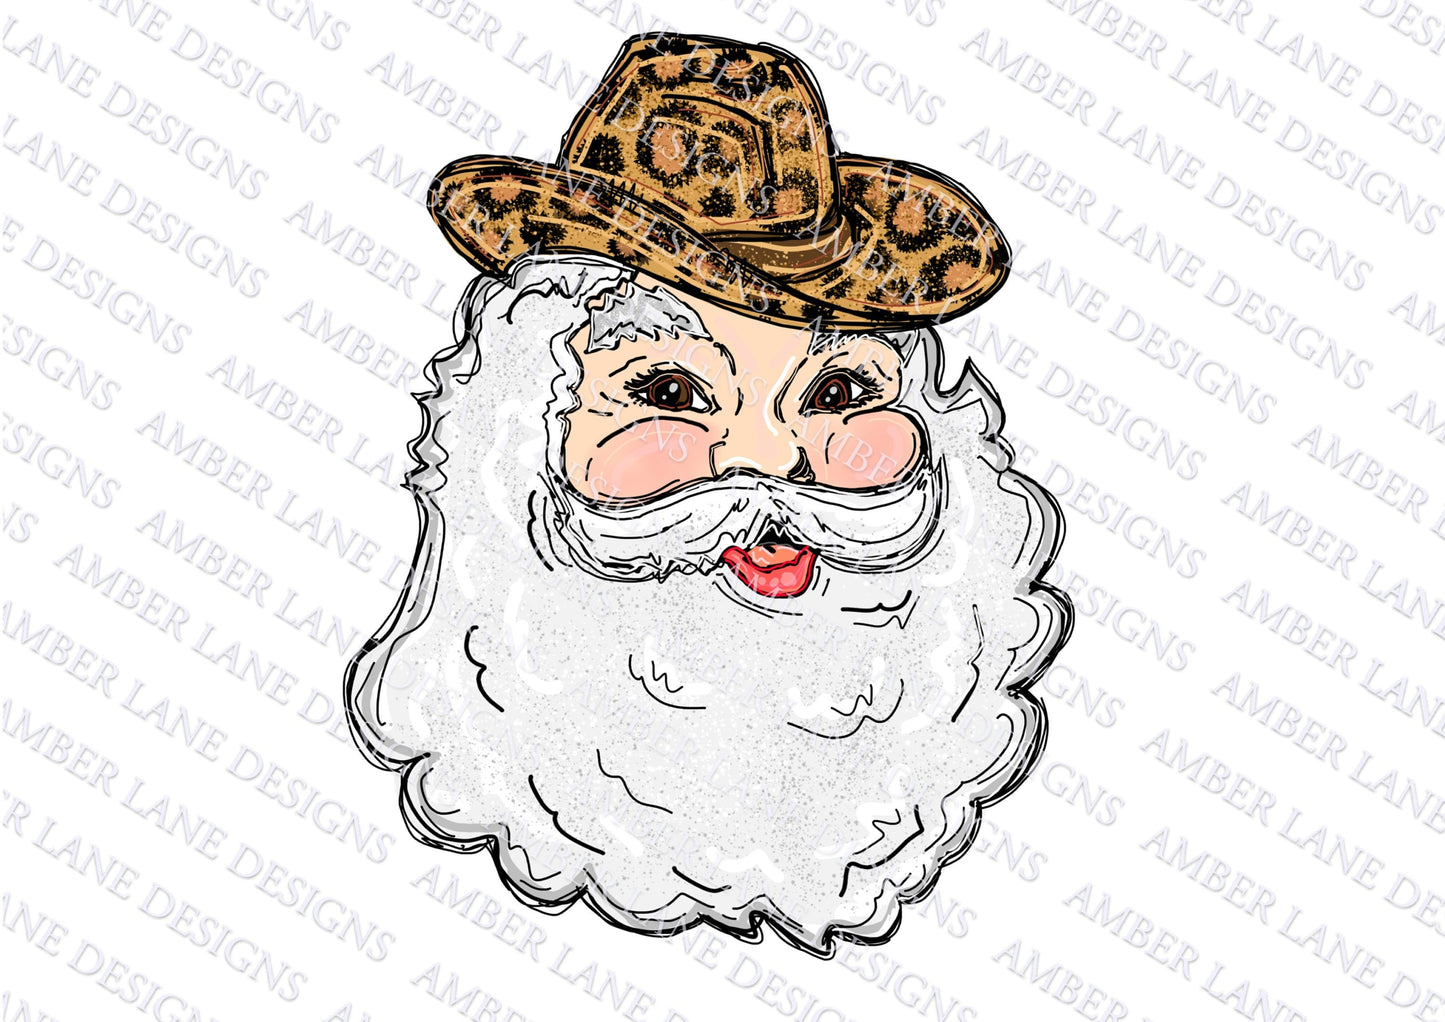 Father Christmas in Fur: Vintage Santa Claus with Leopard Cowboy Hat Countryside Kris Kringle